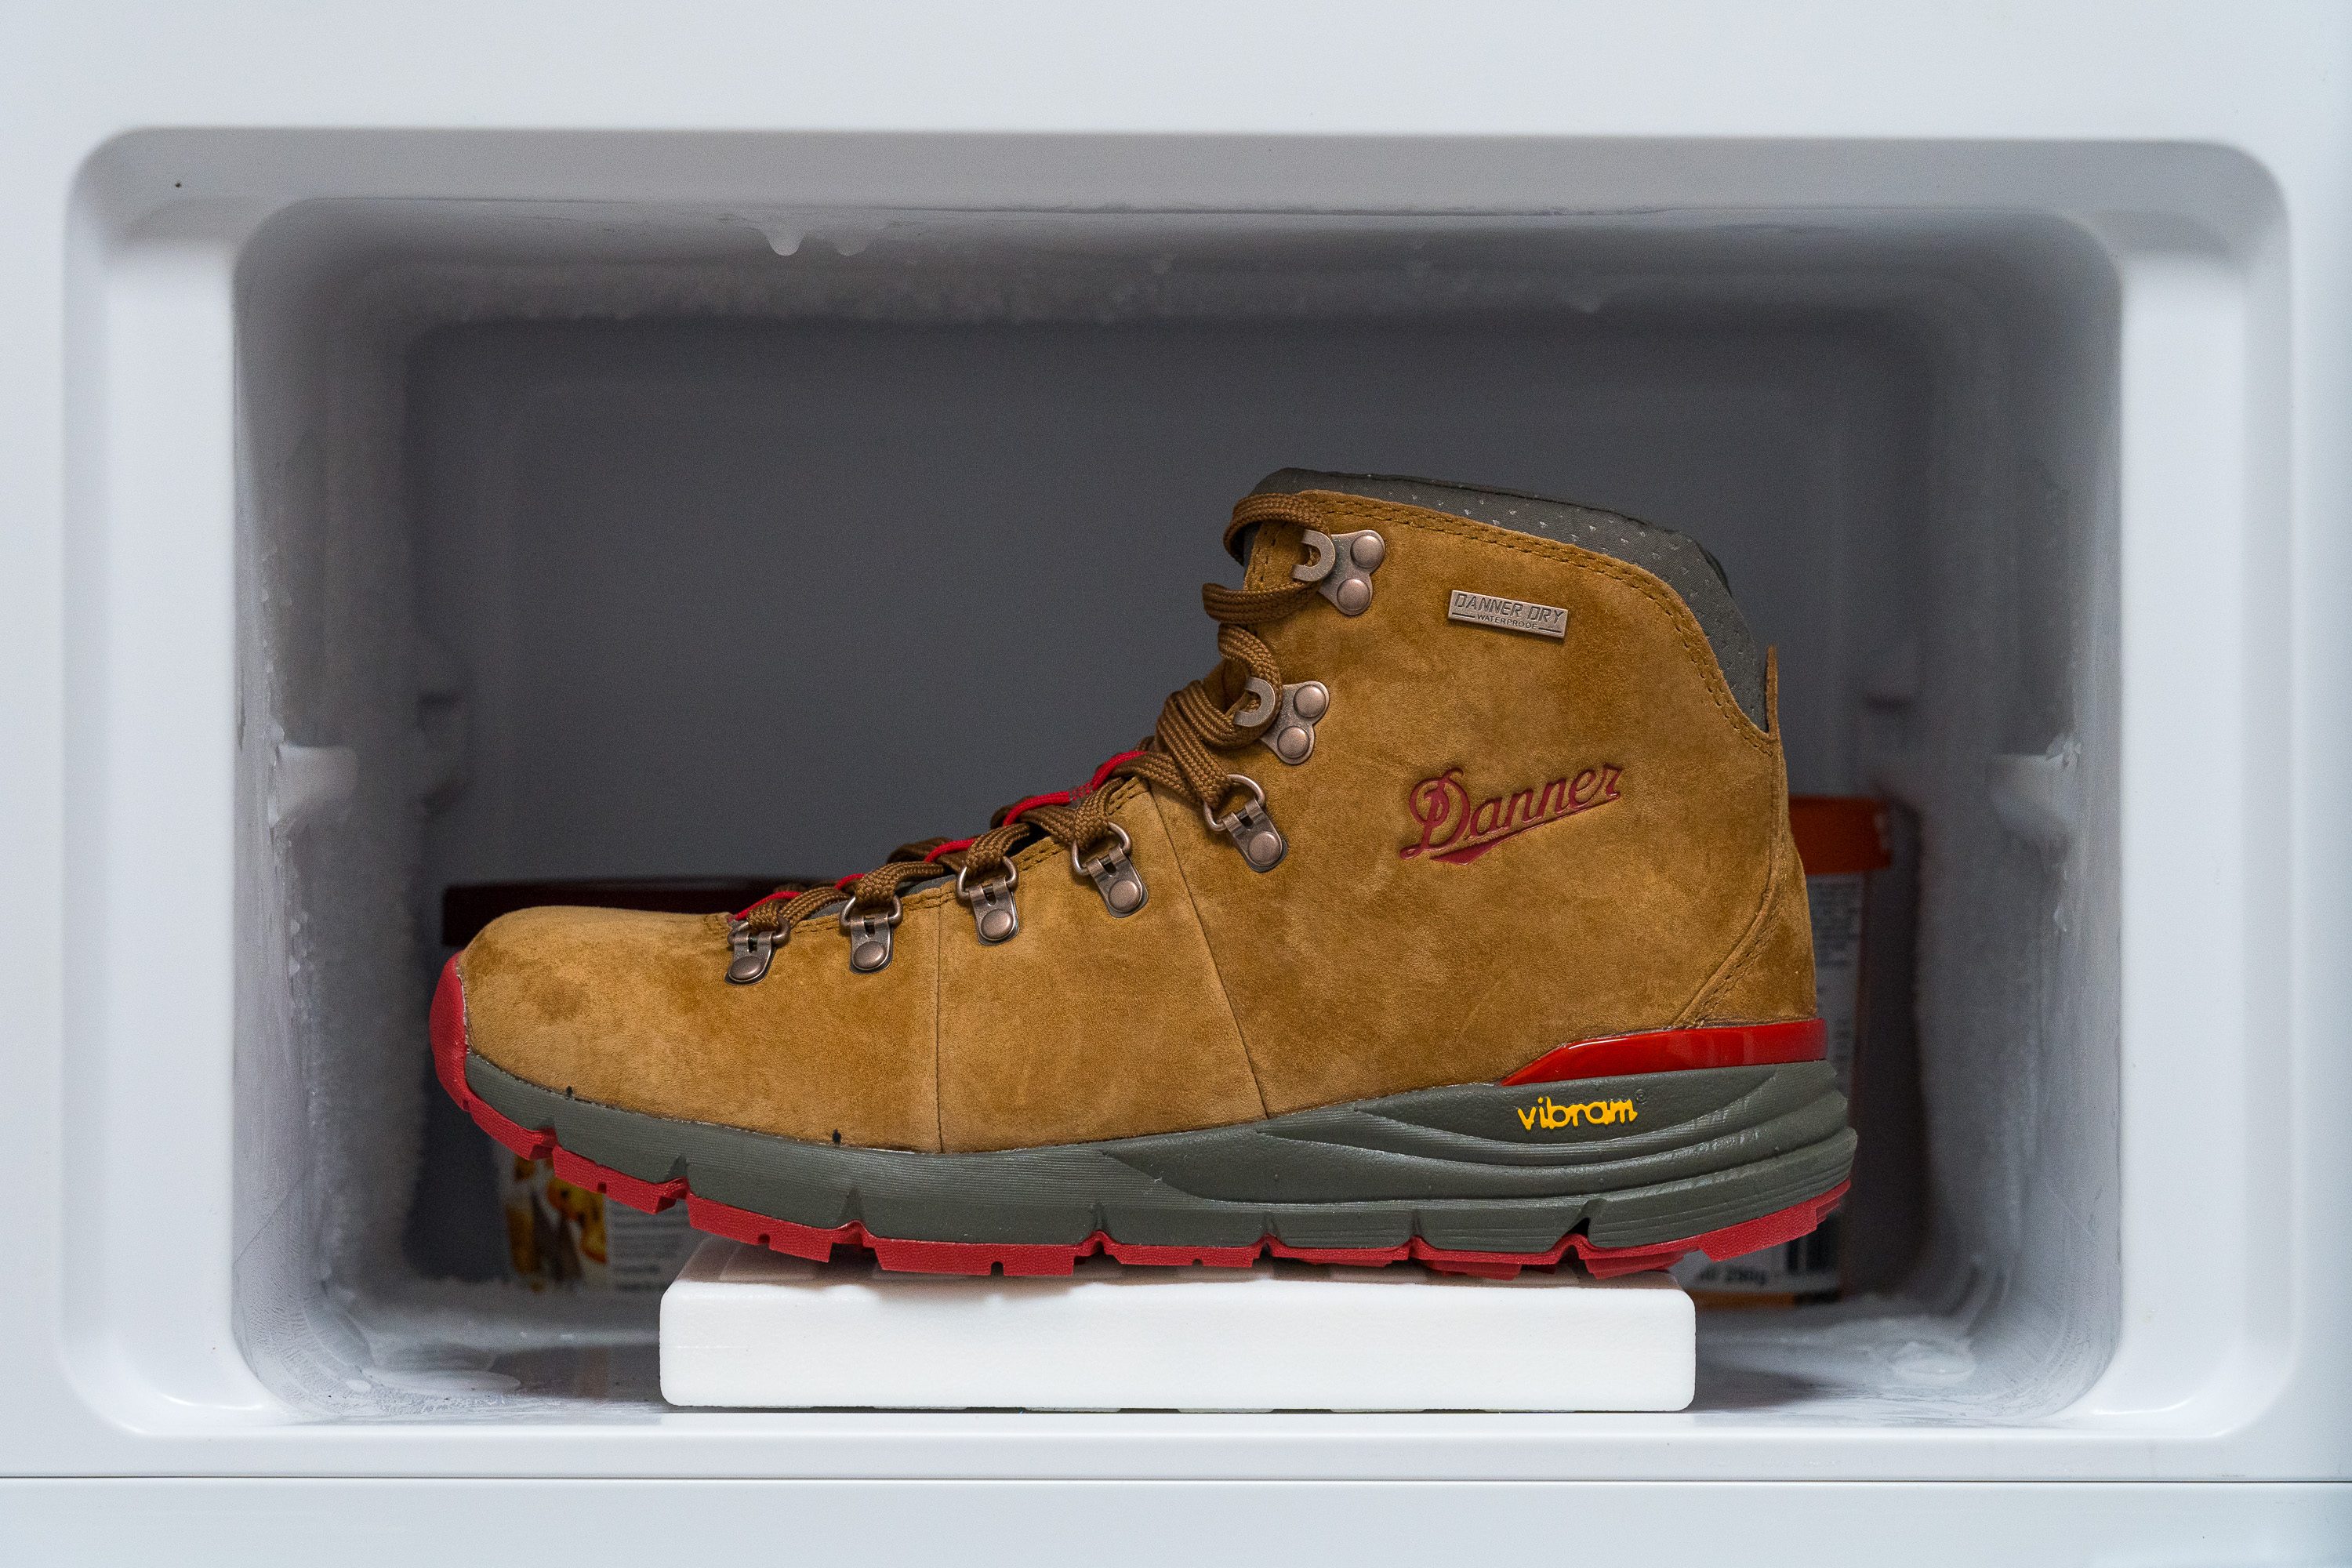 Danner Mountain 600 Midsole softness in cold